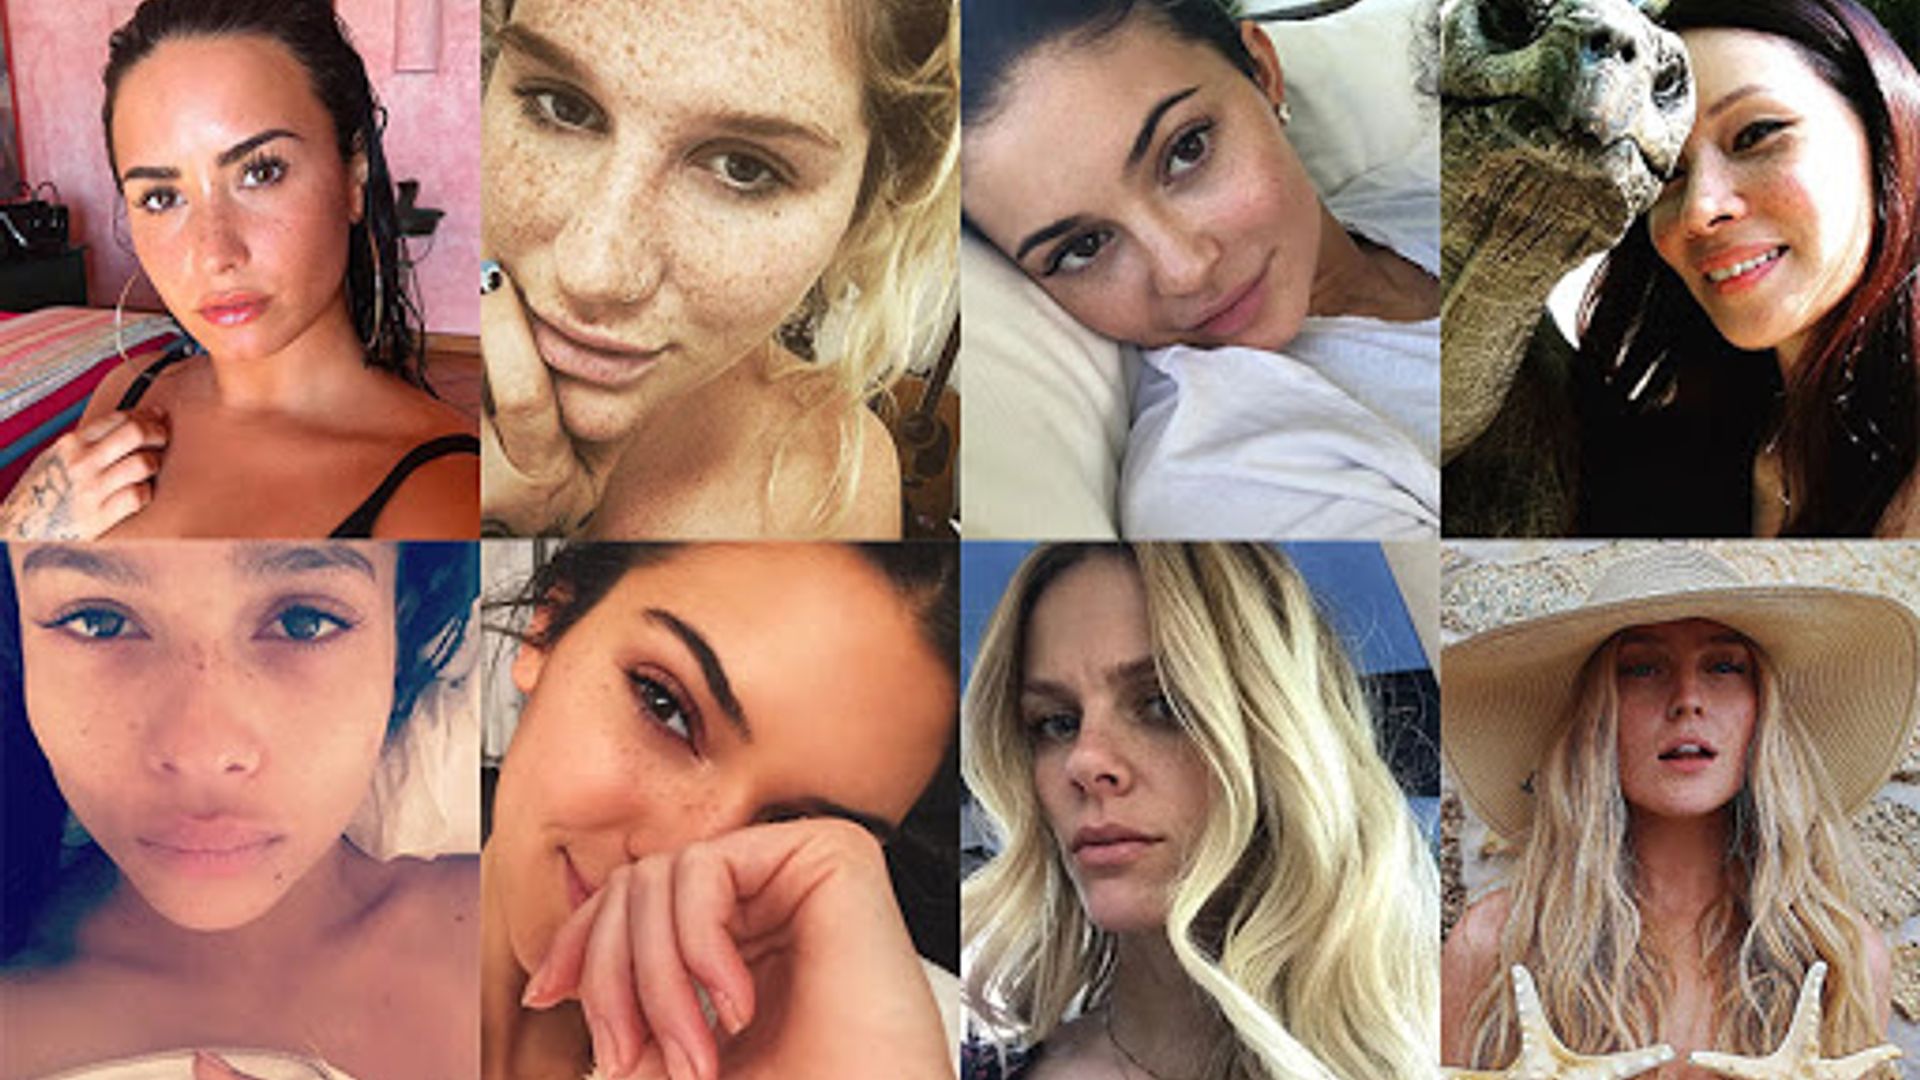 There's a rise in celebrities showing off their freckles on Instagram, and I love it